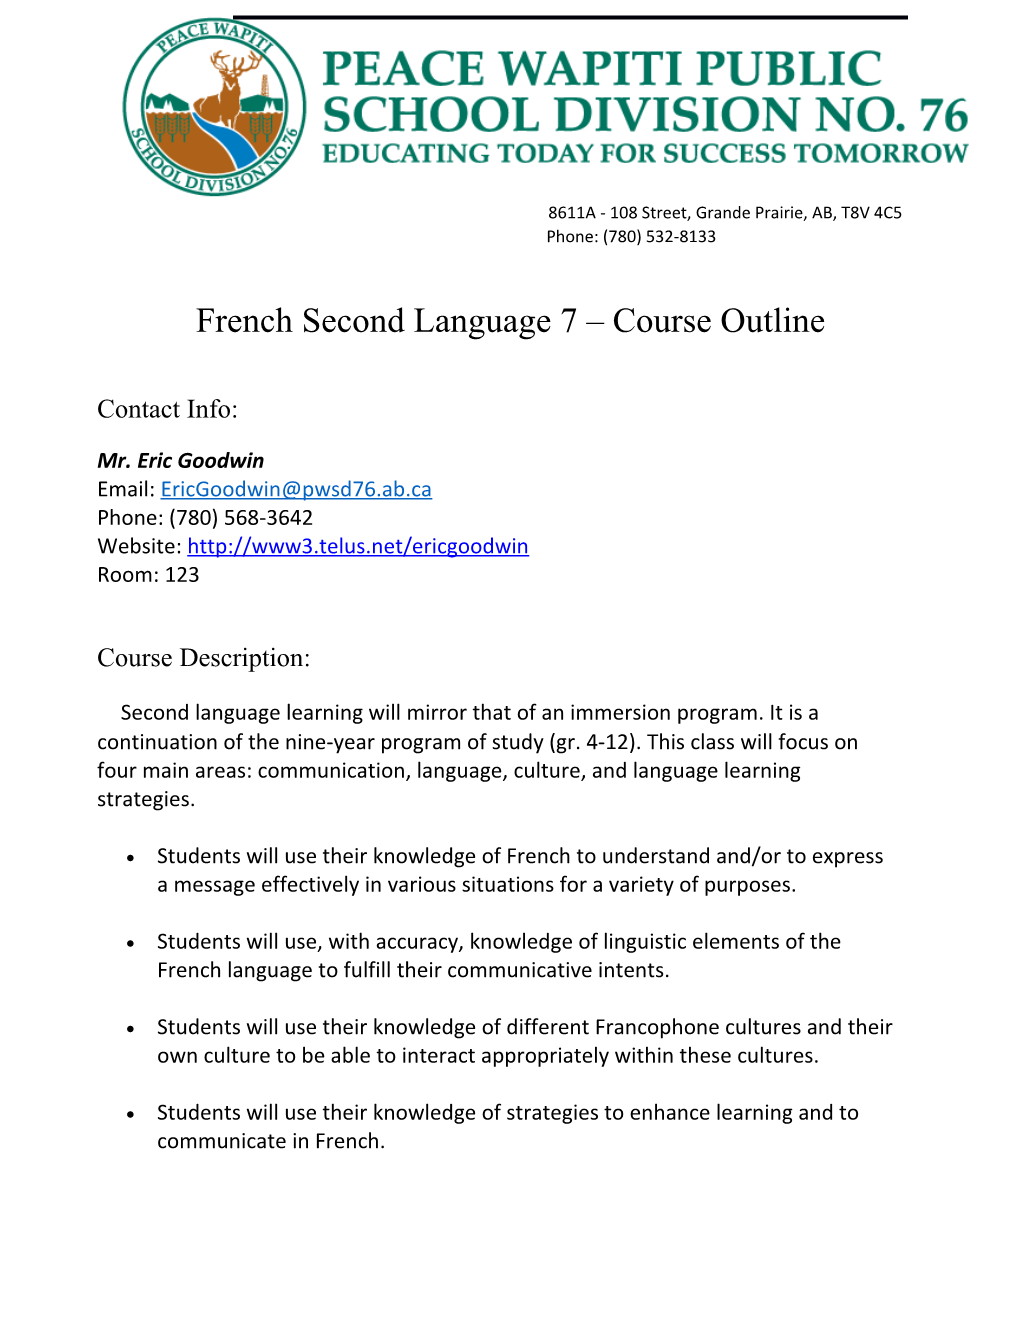 French Second Language 7 Course Outline